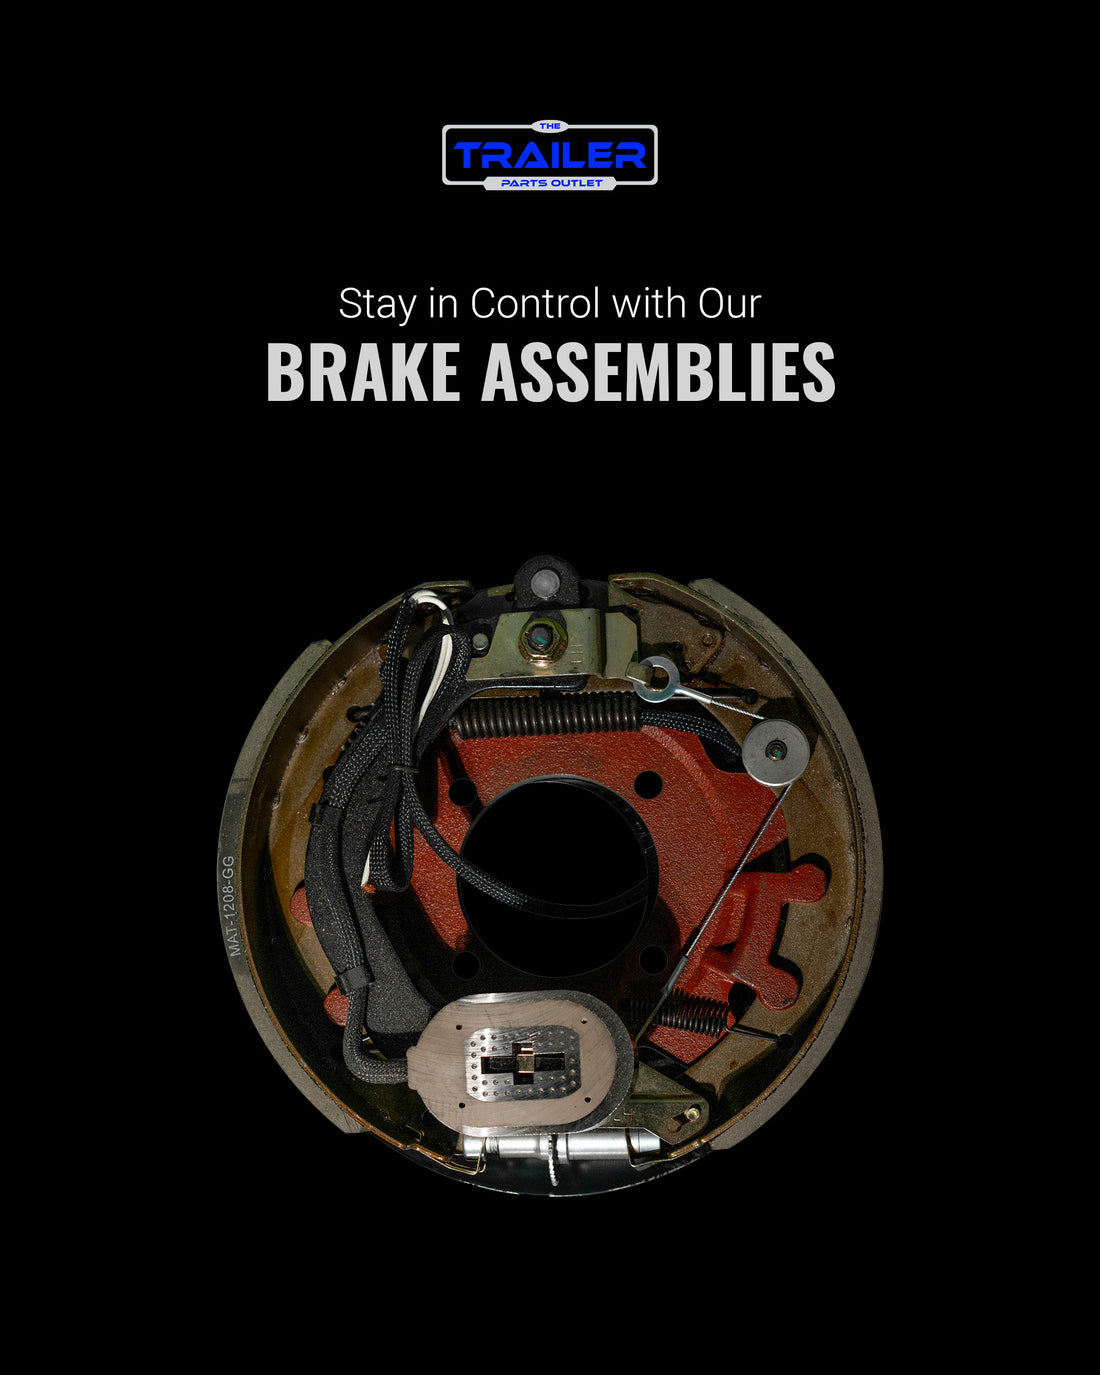 Trailer Brake Assembly Replacement, Brake Kits for Trailers from The Trailer Parts Outlet